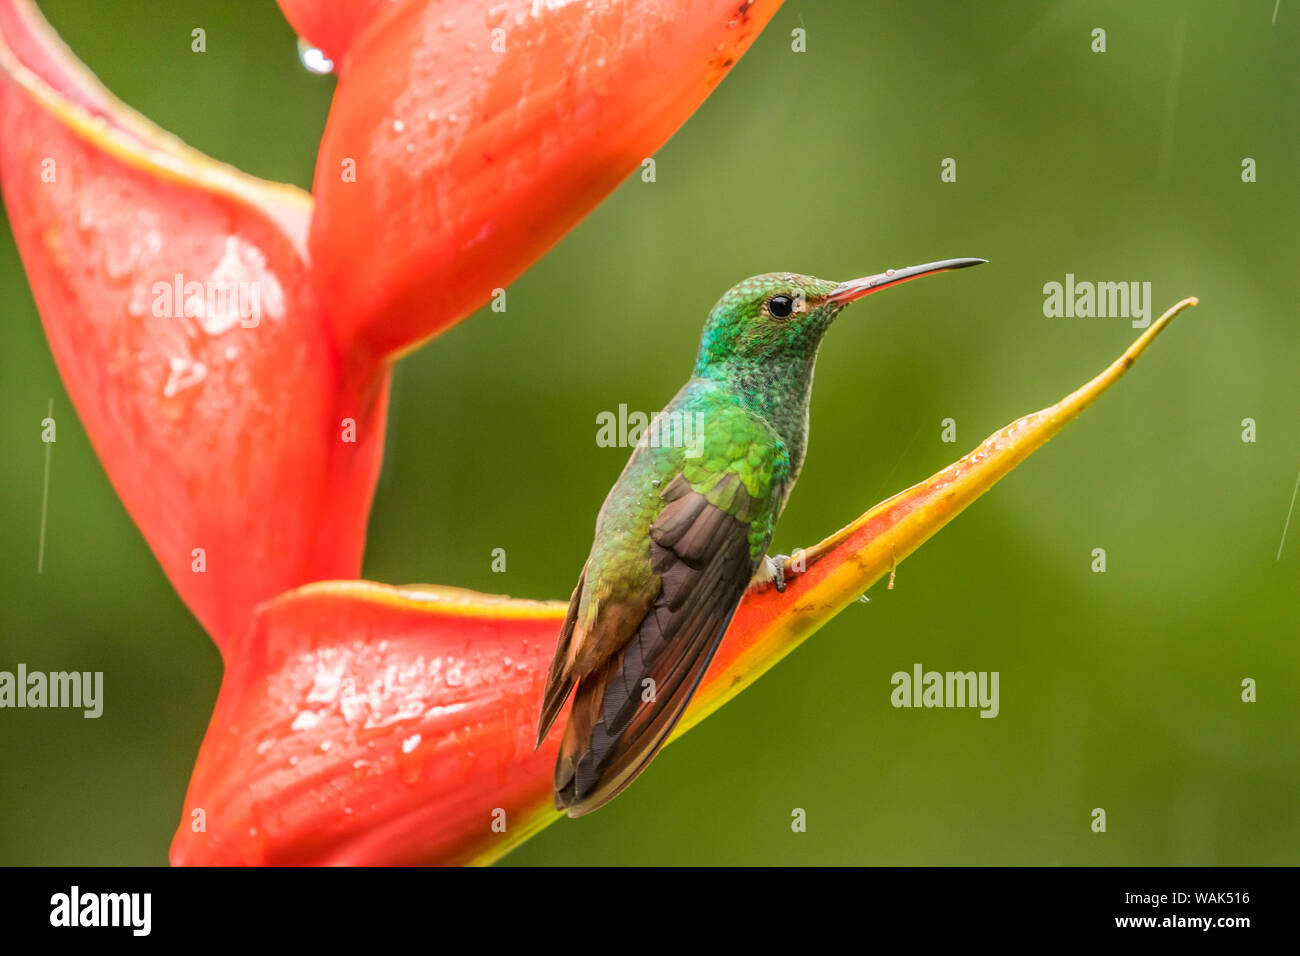 Costa Rica, Sarapiqui River Valley. Rufous-tailed hummingbird on heliconia plant. Credit as: Cathy & Gordon Illg / Jaynes Gallery / DanitaDelimont.com Stock Photo